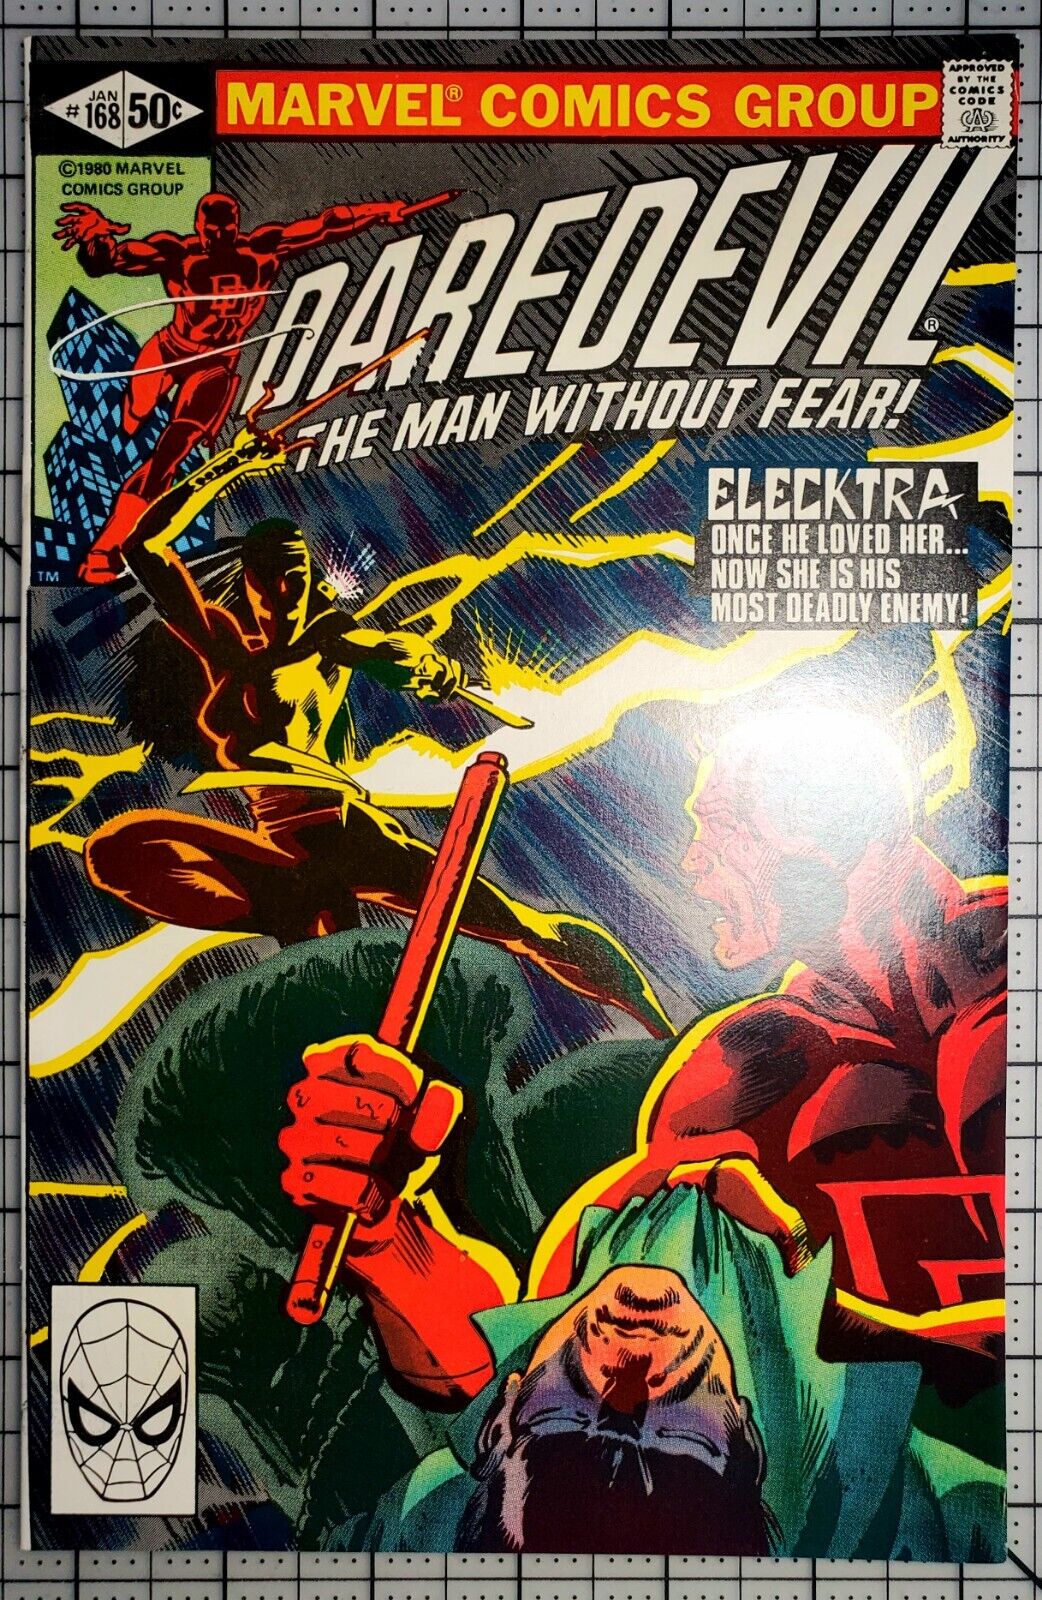 DAREDEVIL #168, First Appearance Elektra PRESSED AND CLEANED Key Grail 